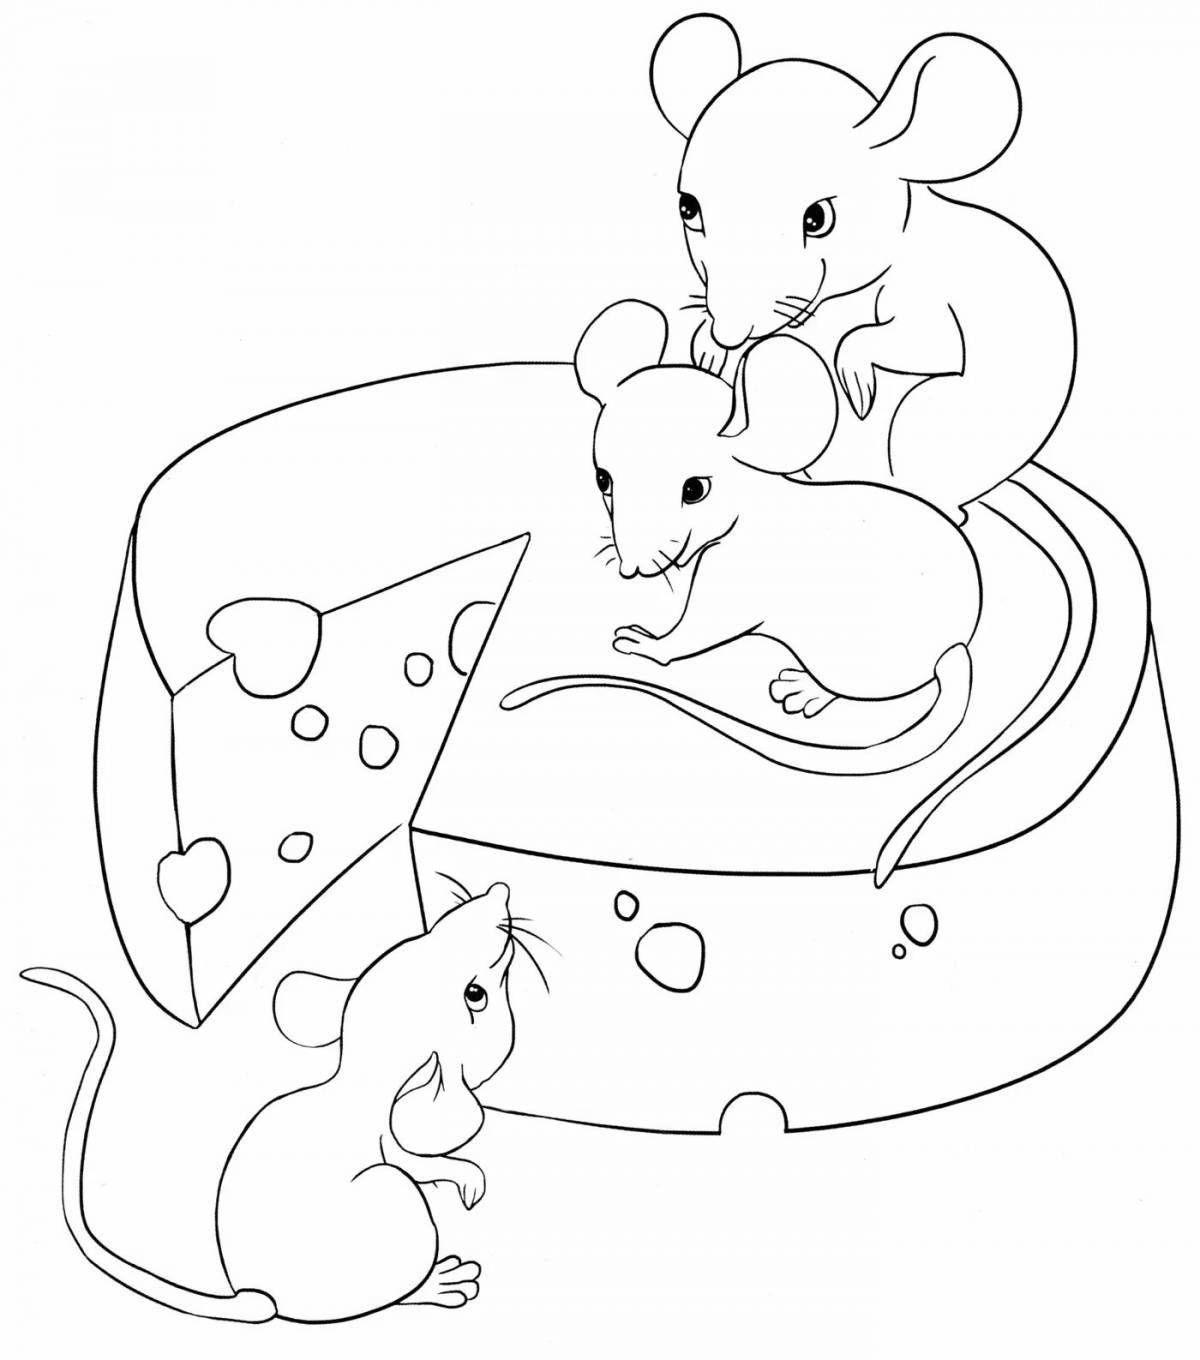 Mouse with cheese #6